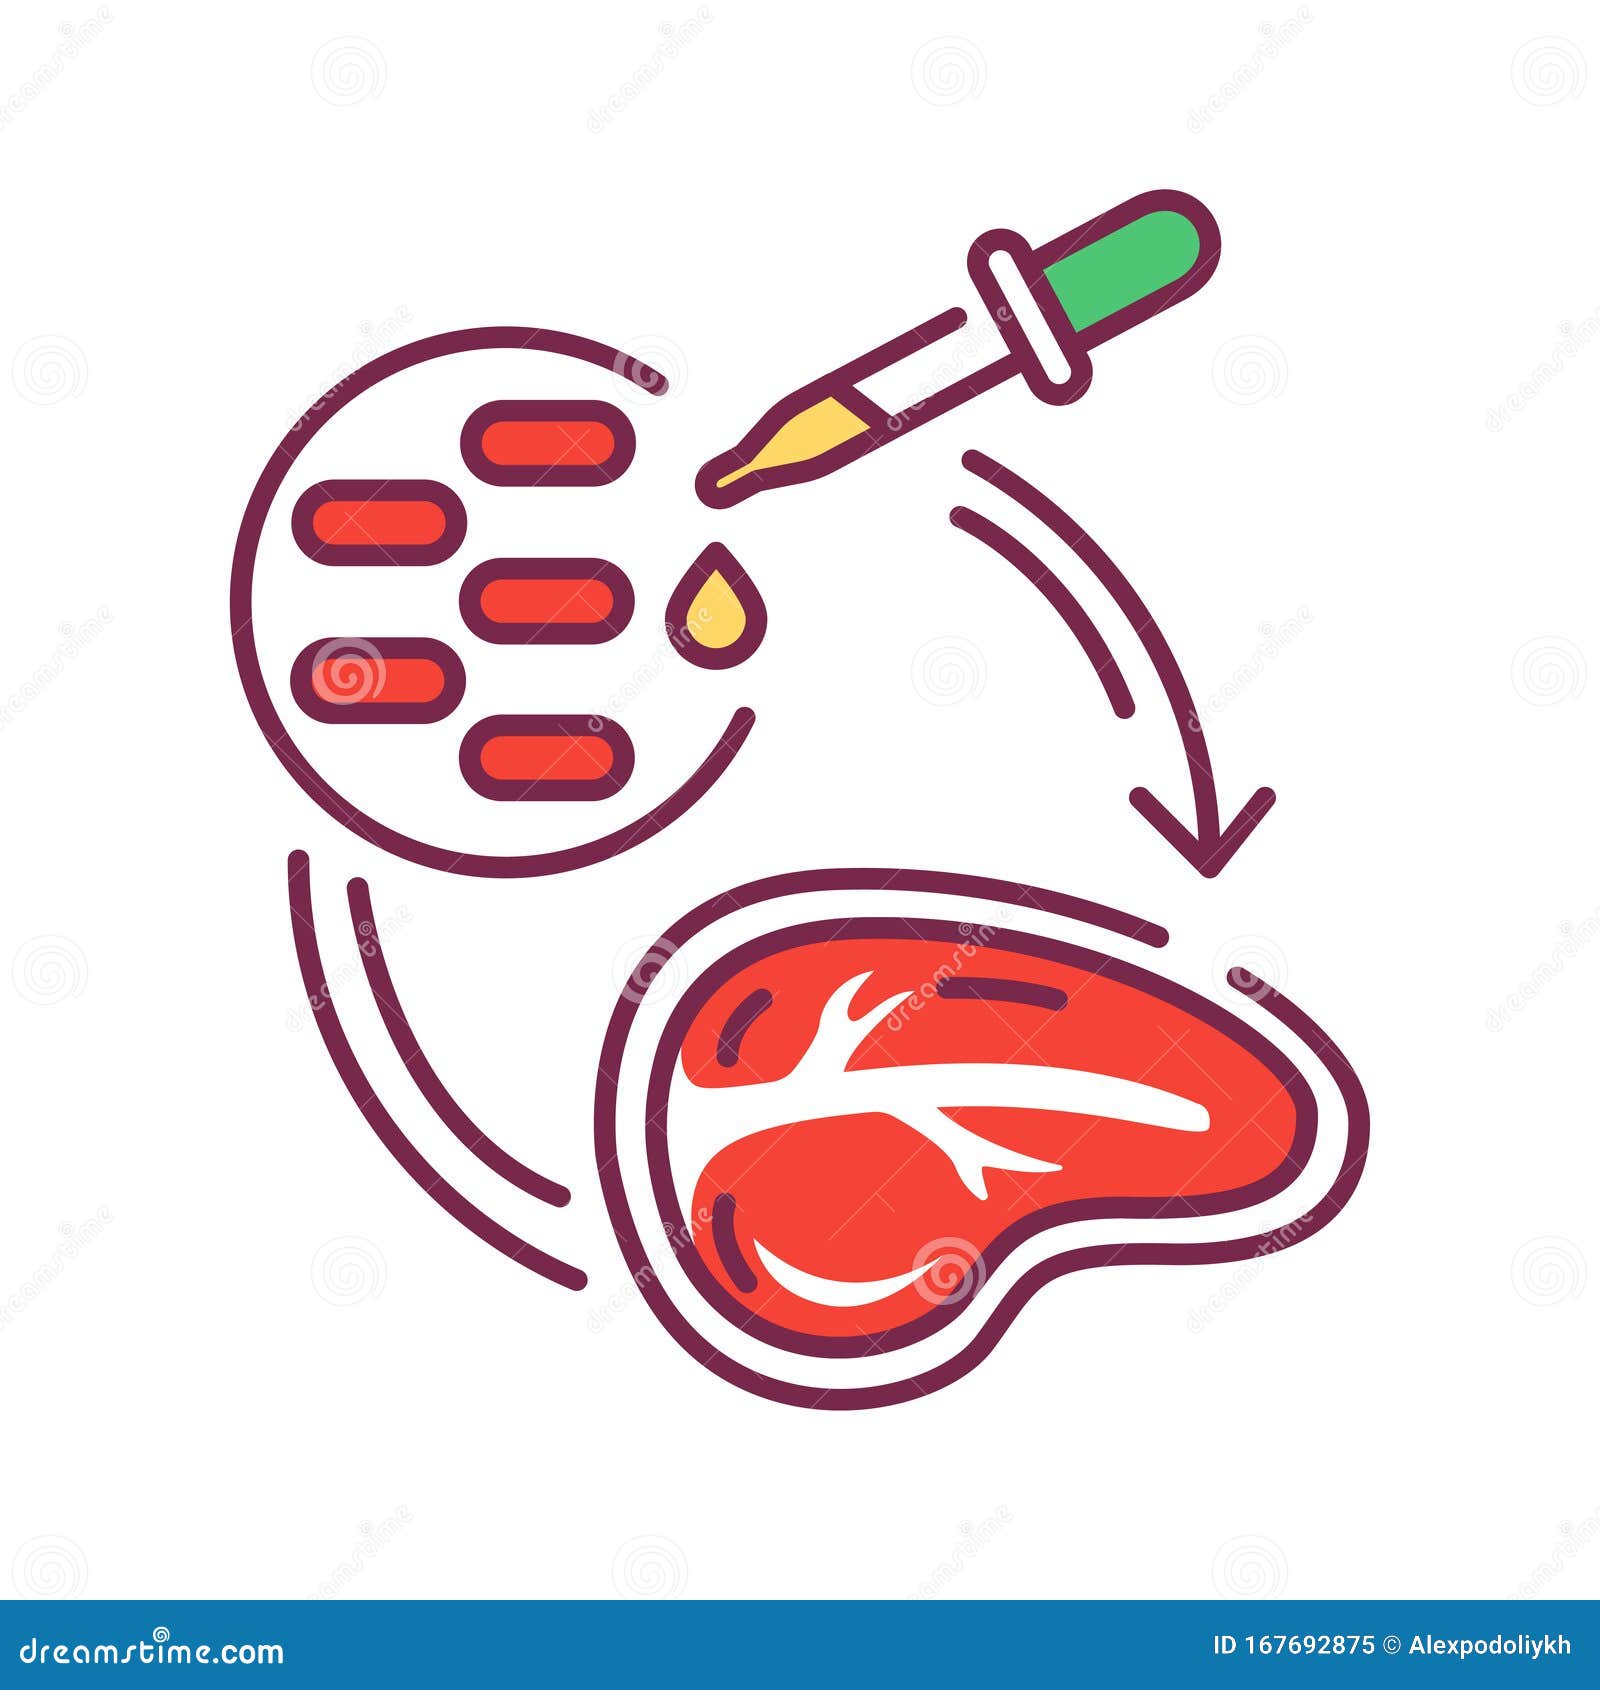 Stem Cell Meat Color Line Icon. Meat Produced by in Vitro Cell Culture of Animal  Cells, instead of from Slaughtered Animals Stock Vector - Illustration of  contour, food: 167692875